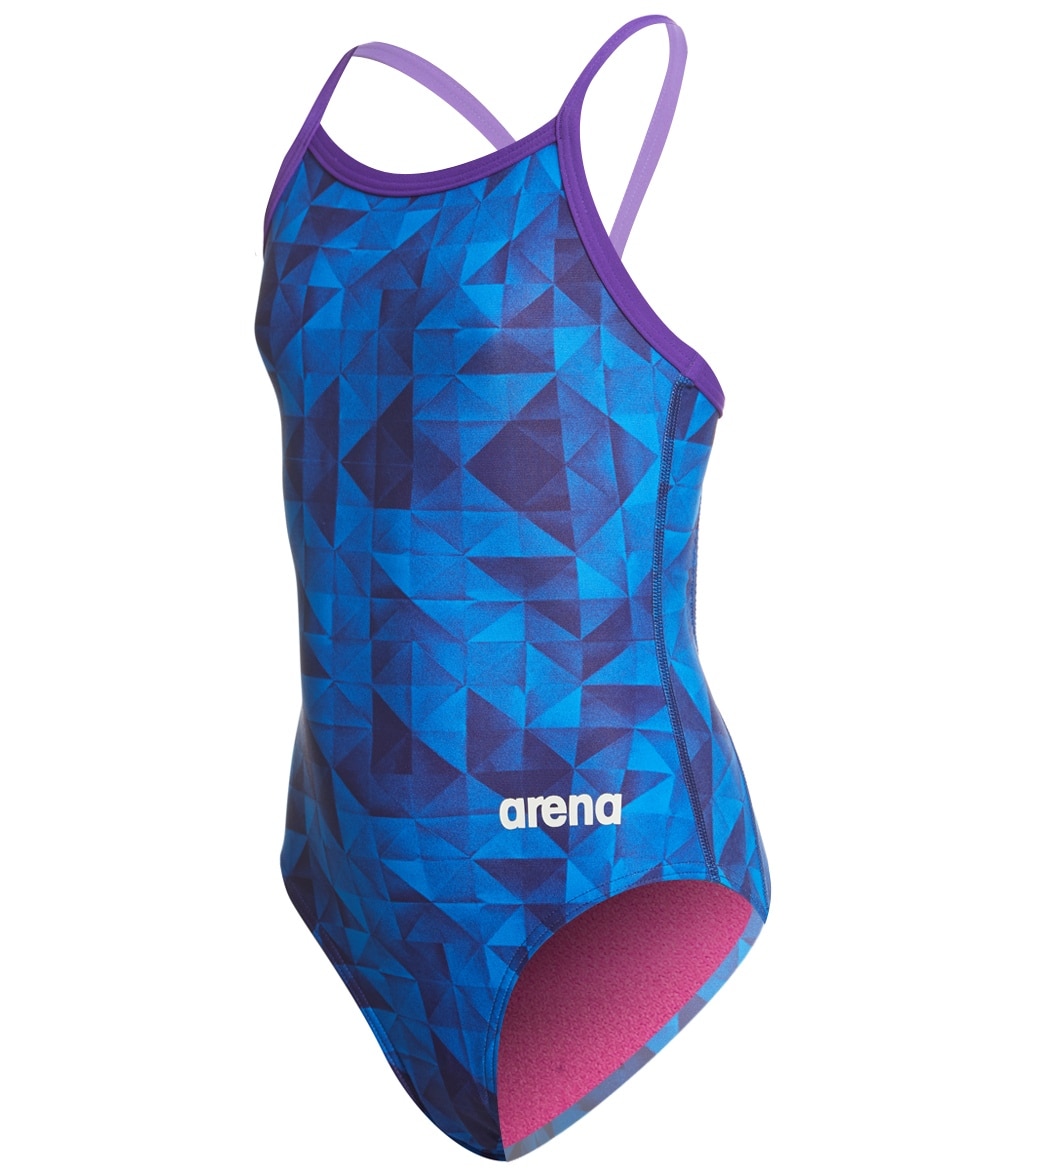 Arena Girls' Origami Maxlife Sporty Racer Back One Piece Swimsuit - Navy/Plum 22 Polyester/Pbt - Swimoutlet.com